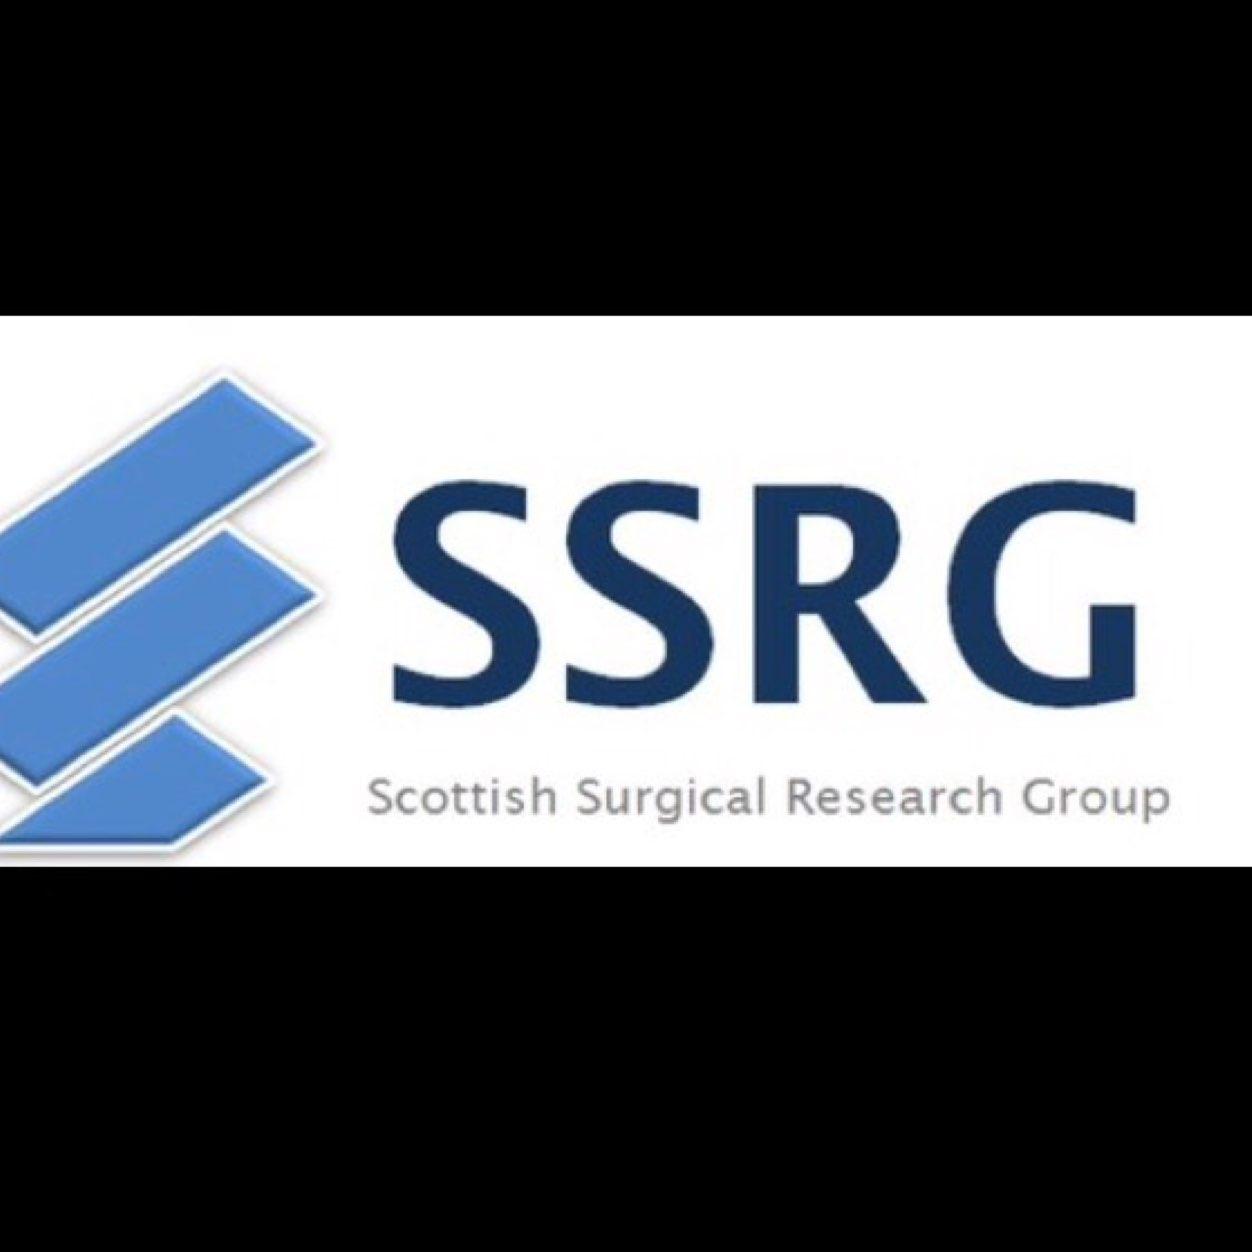 A Scottish Surgical Research Collaborative. Scottish Surgeons and friends - Get involved.